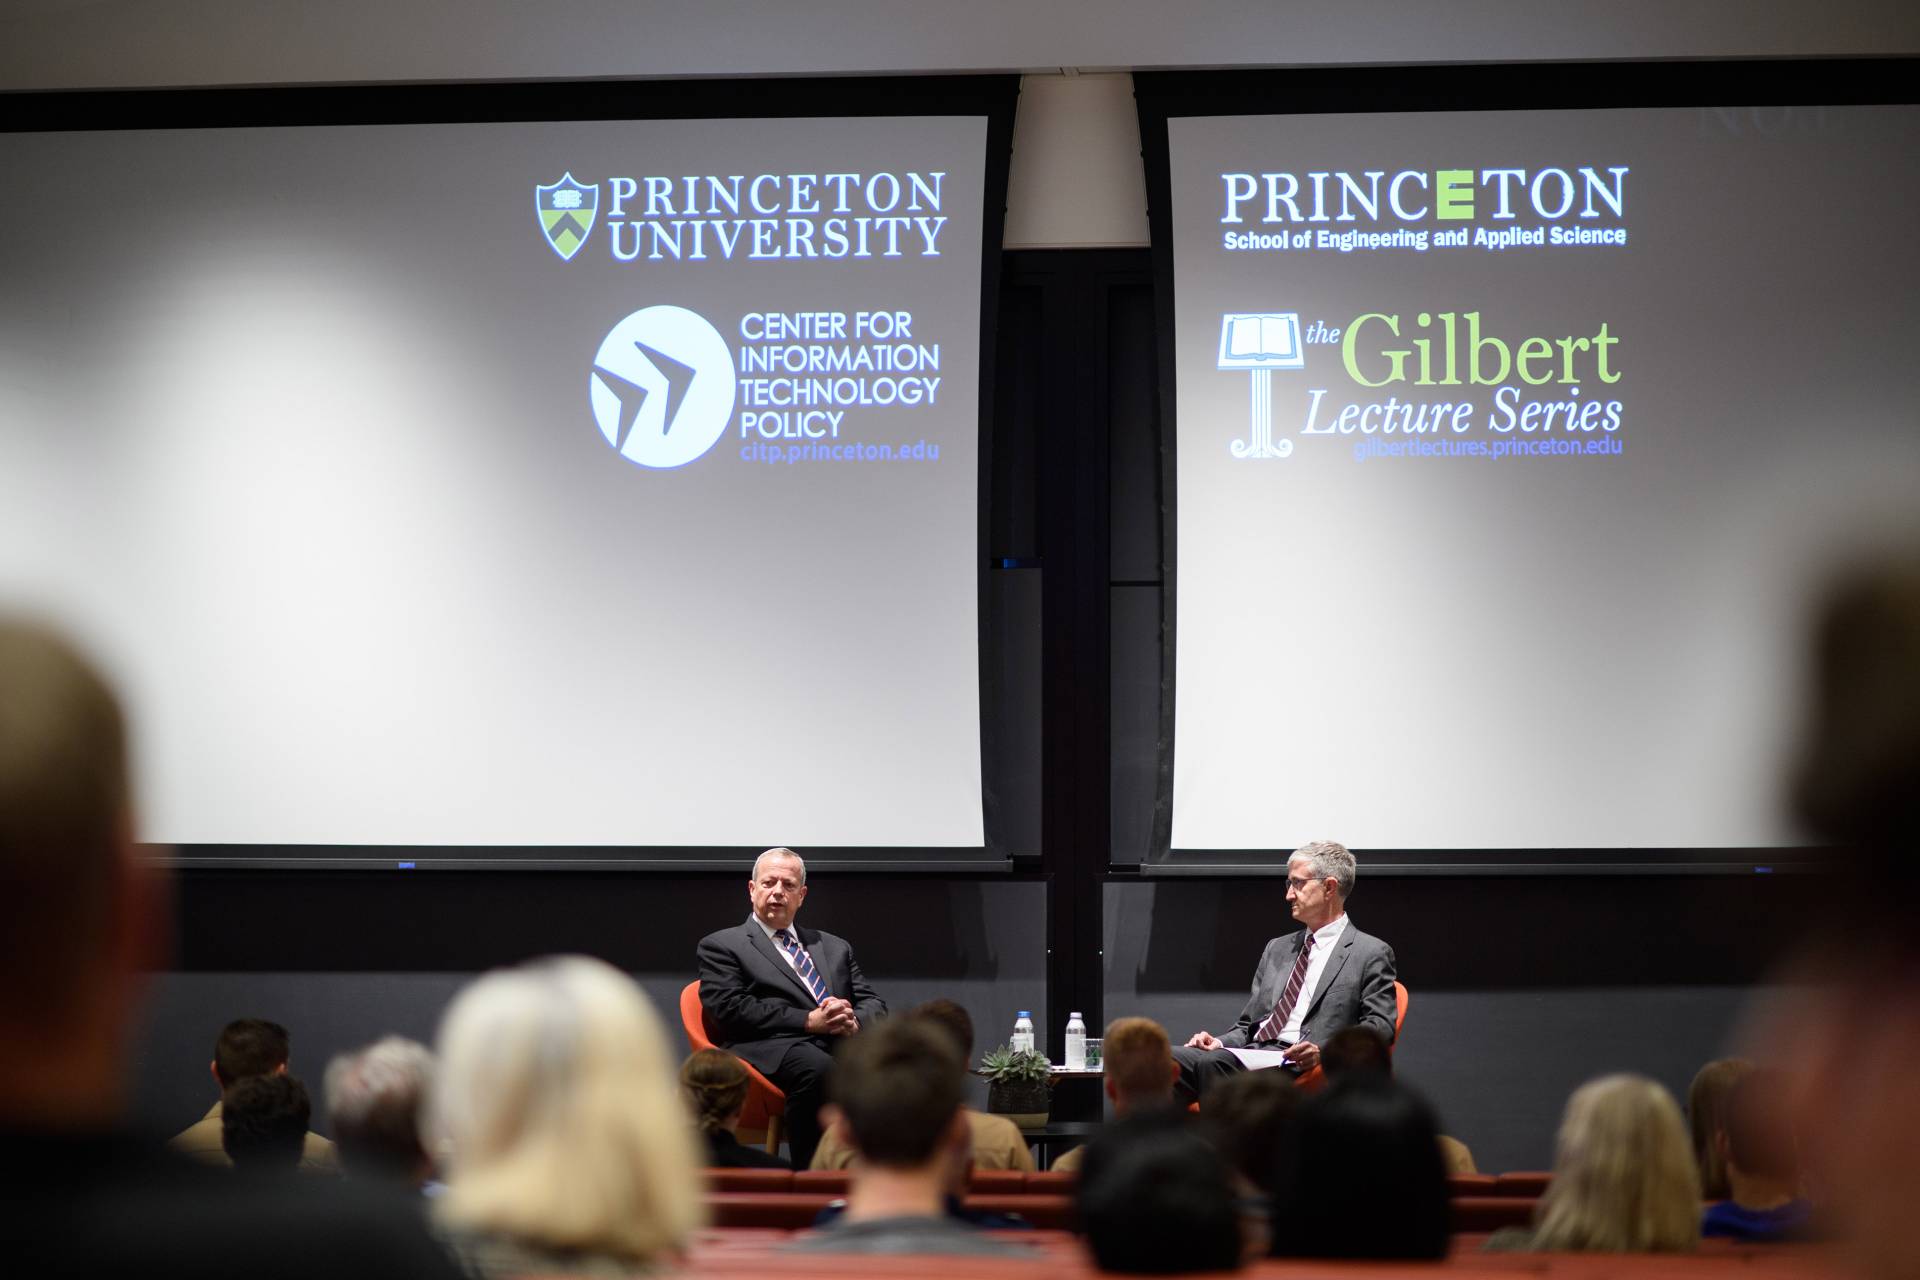 2 men on a stage with projections of Princeton University School of Engineering and Applied Science, CITP, Princeton University, and the Gilbert Lecture Series logos on a screen 